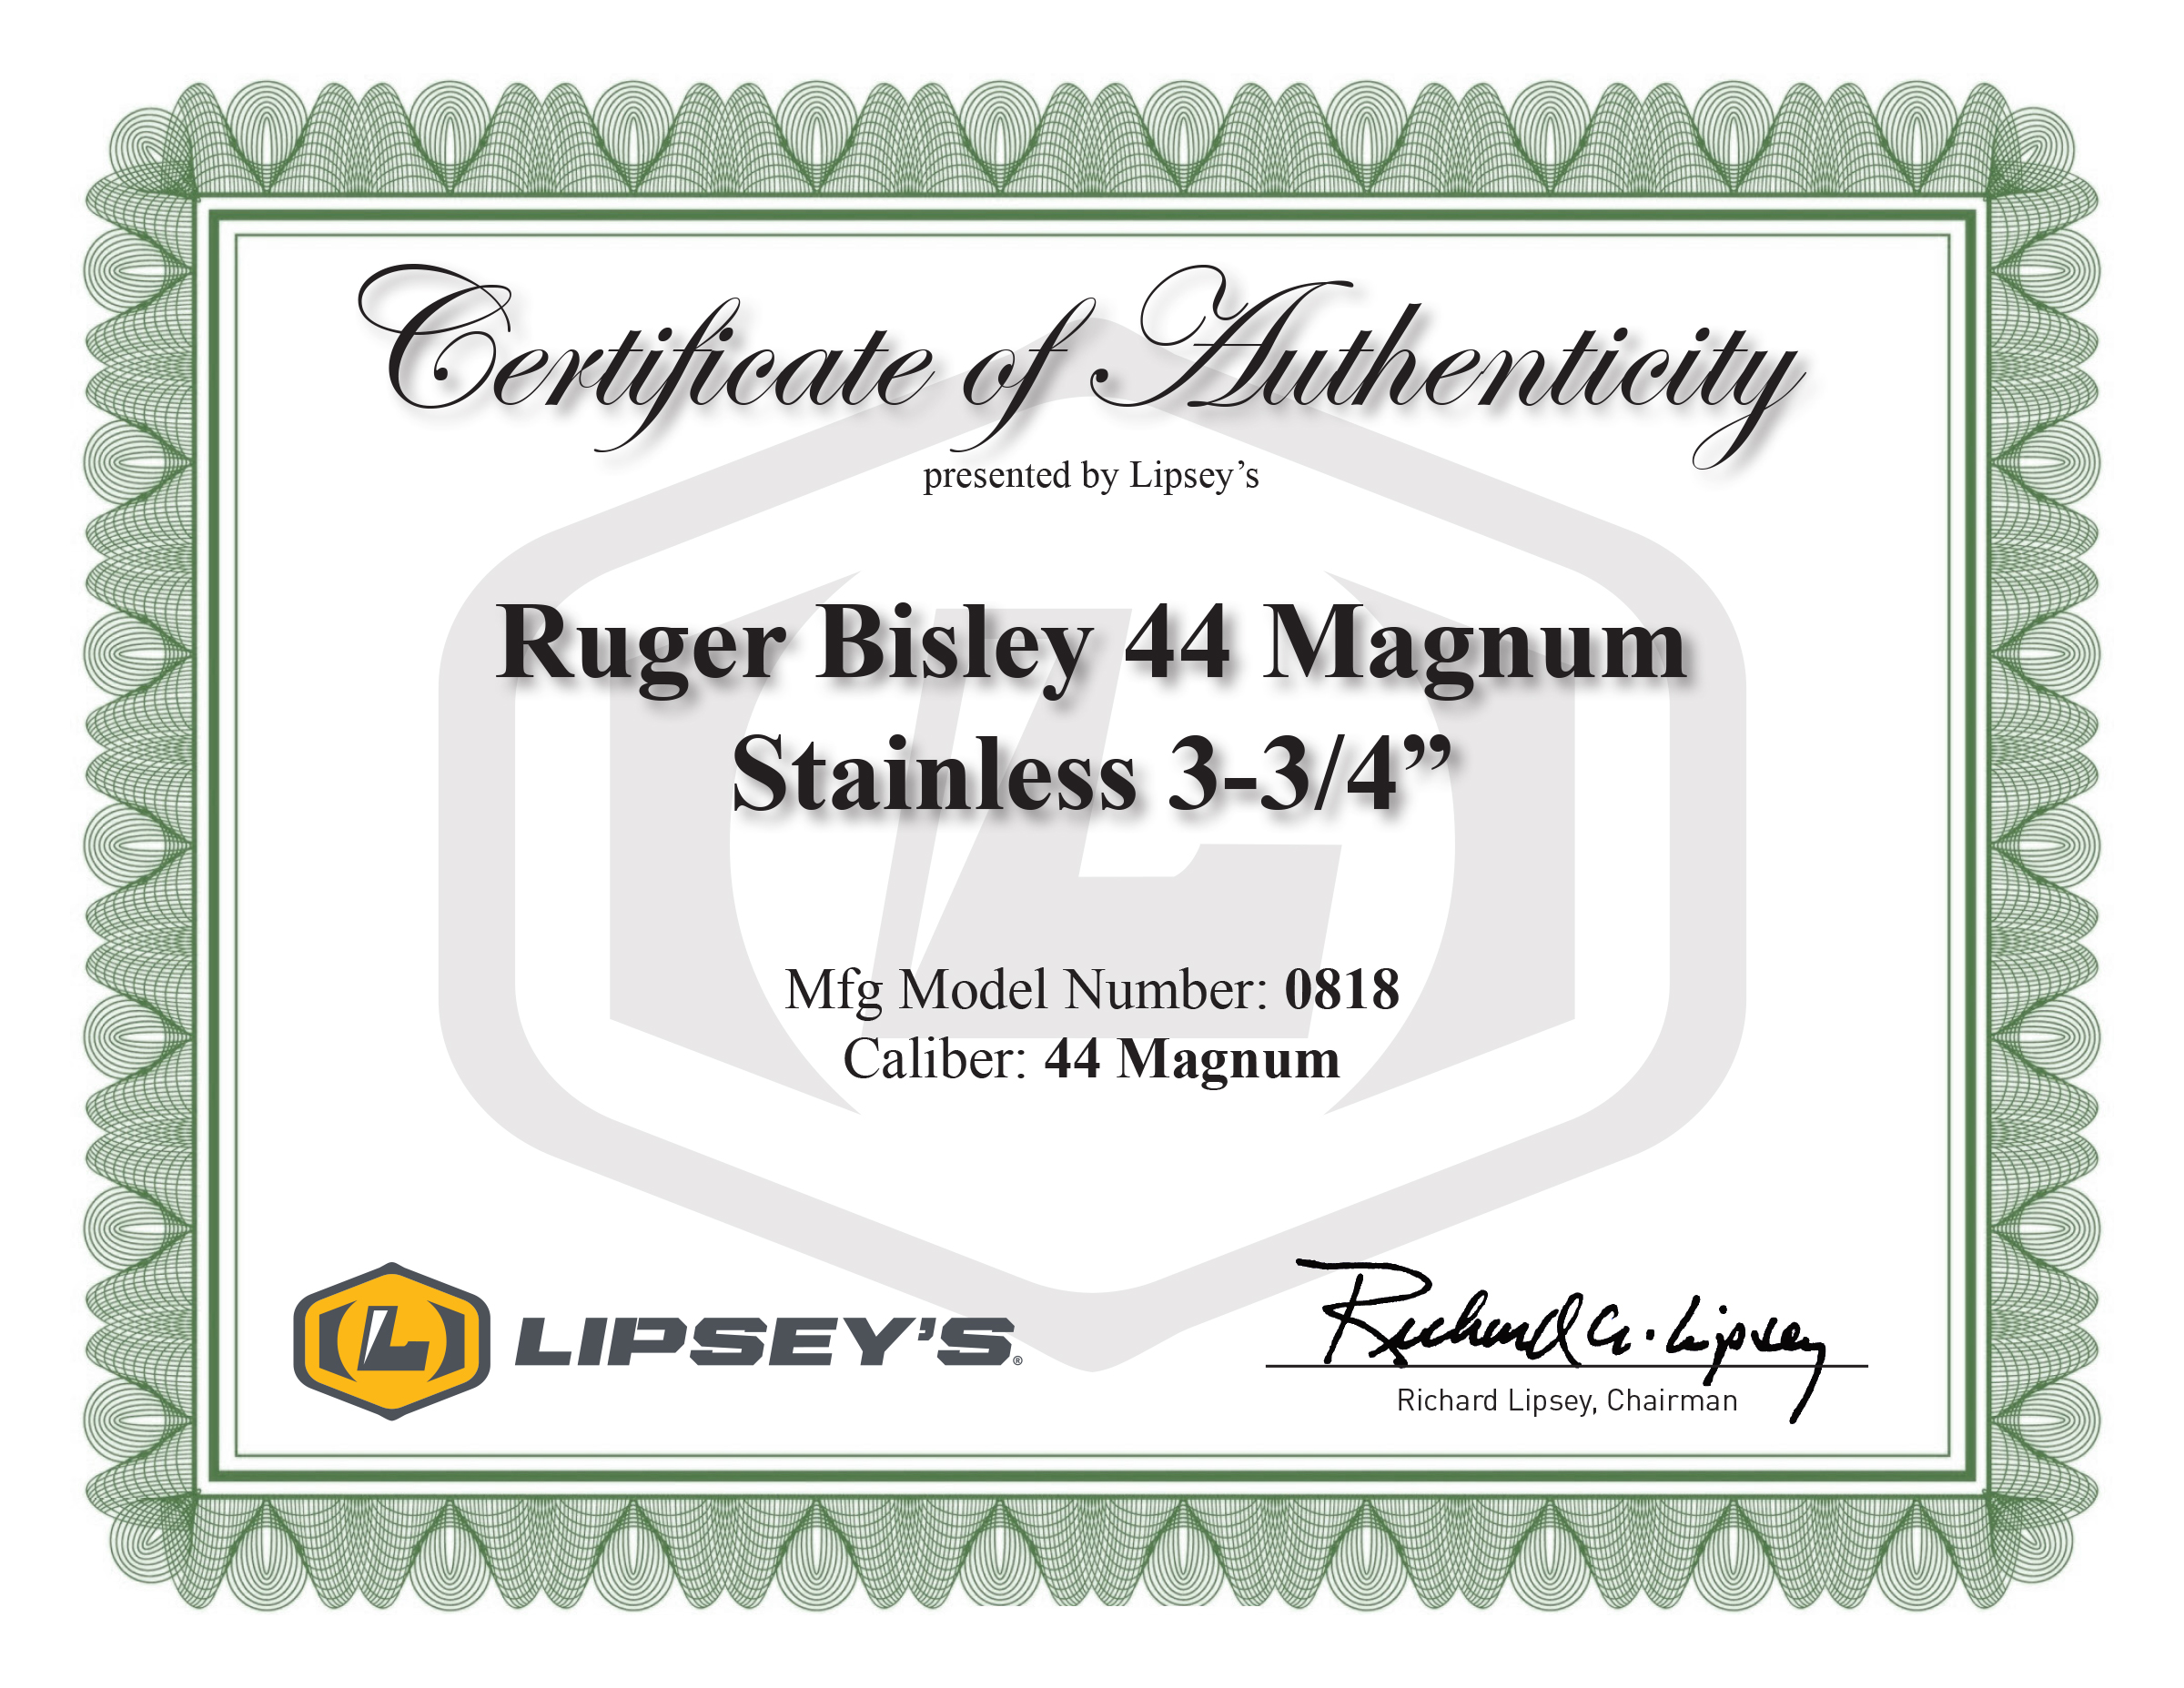 Lipsey's Exclusive Certificate of Authenticity